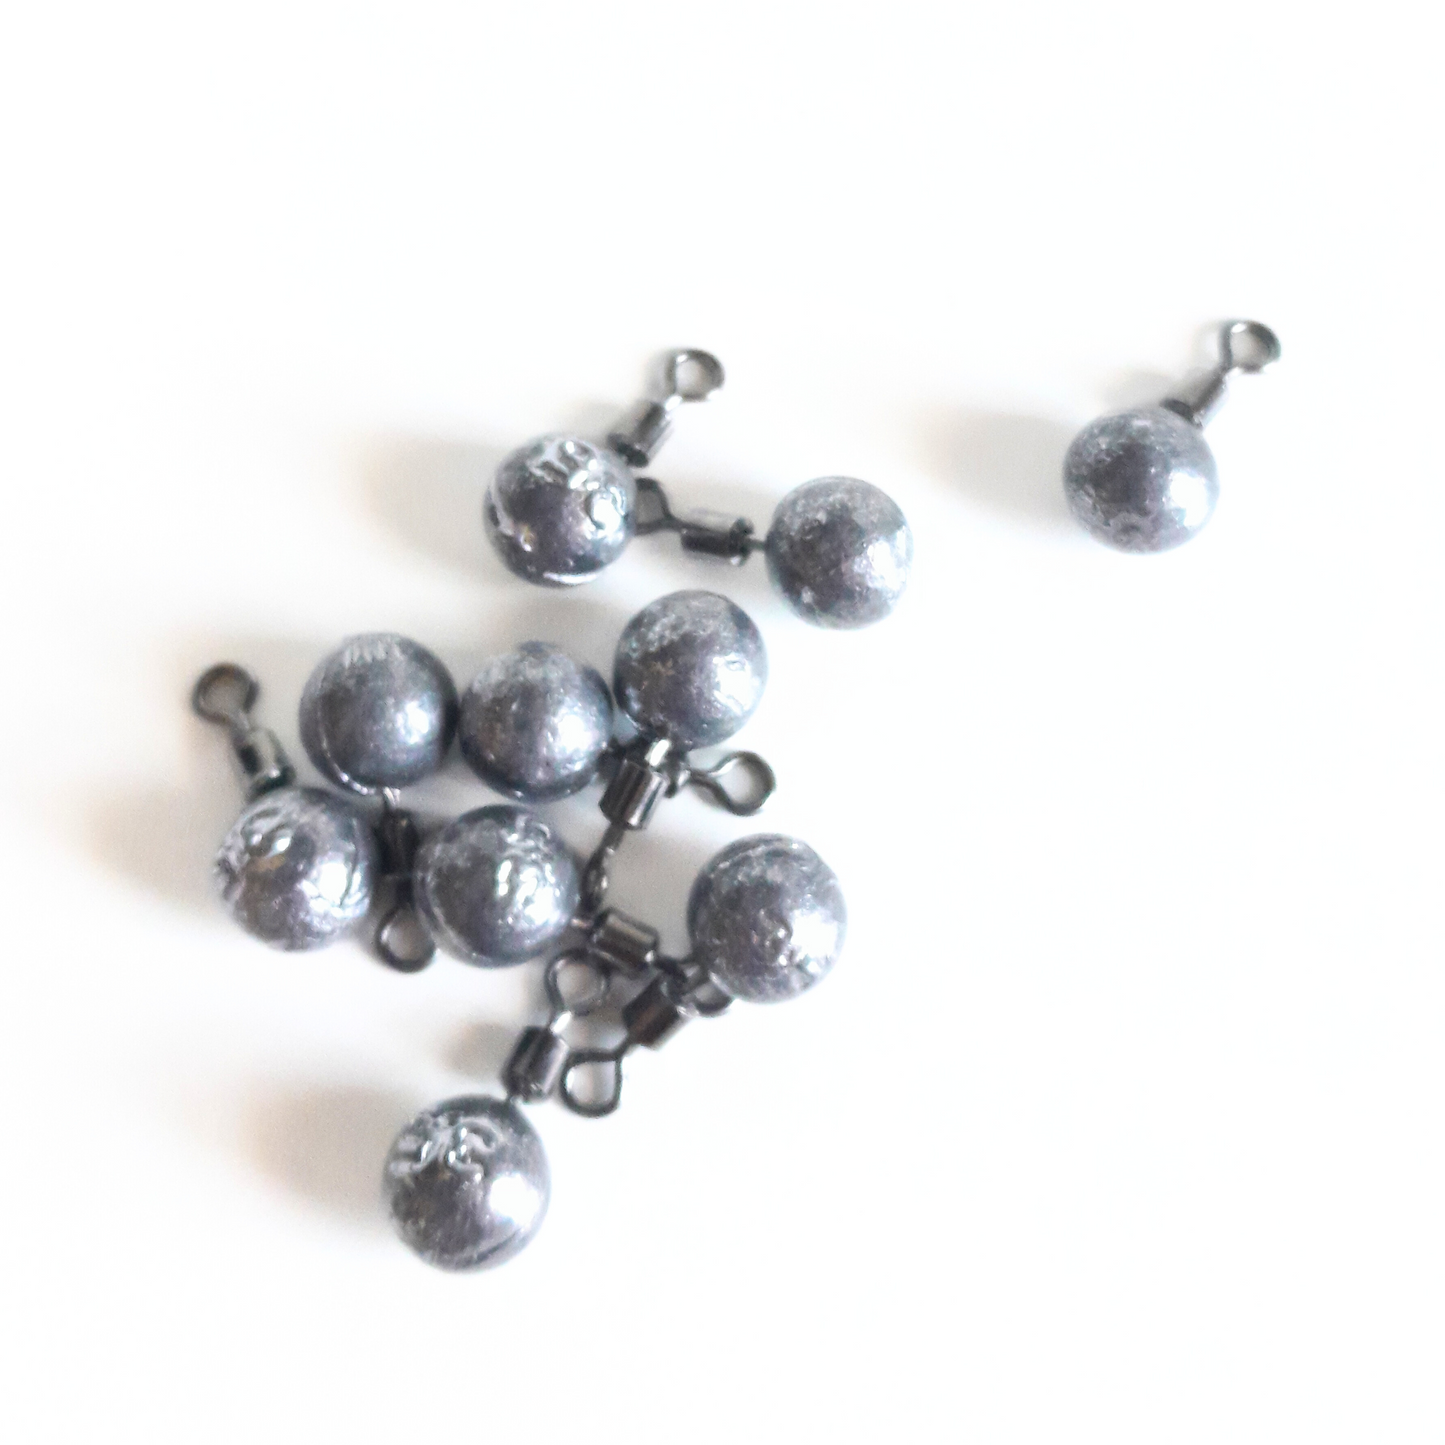 Round Sinkers with Swivel 3.5g | 10 units